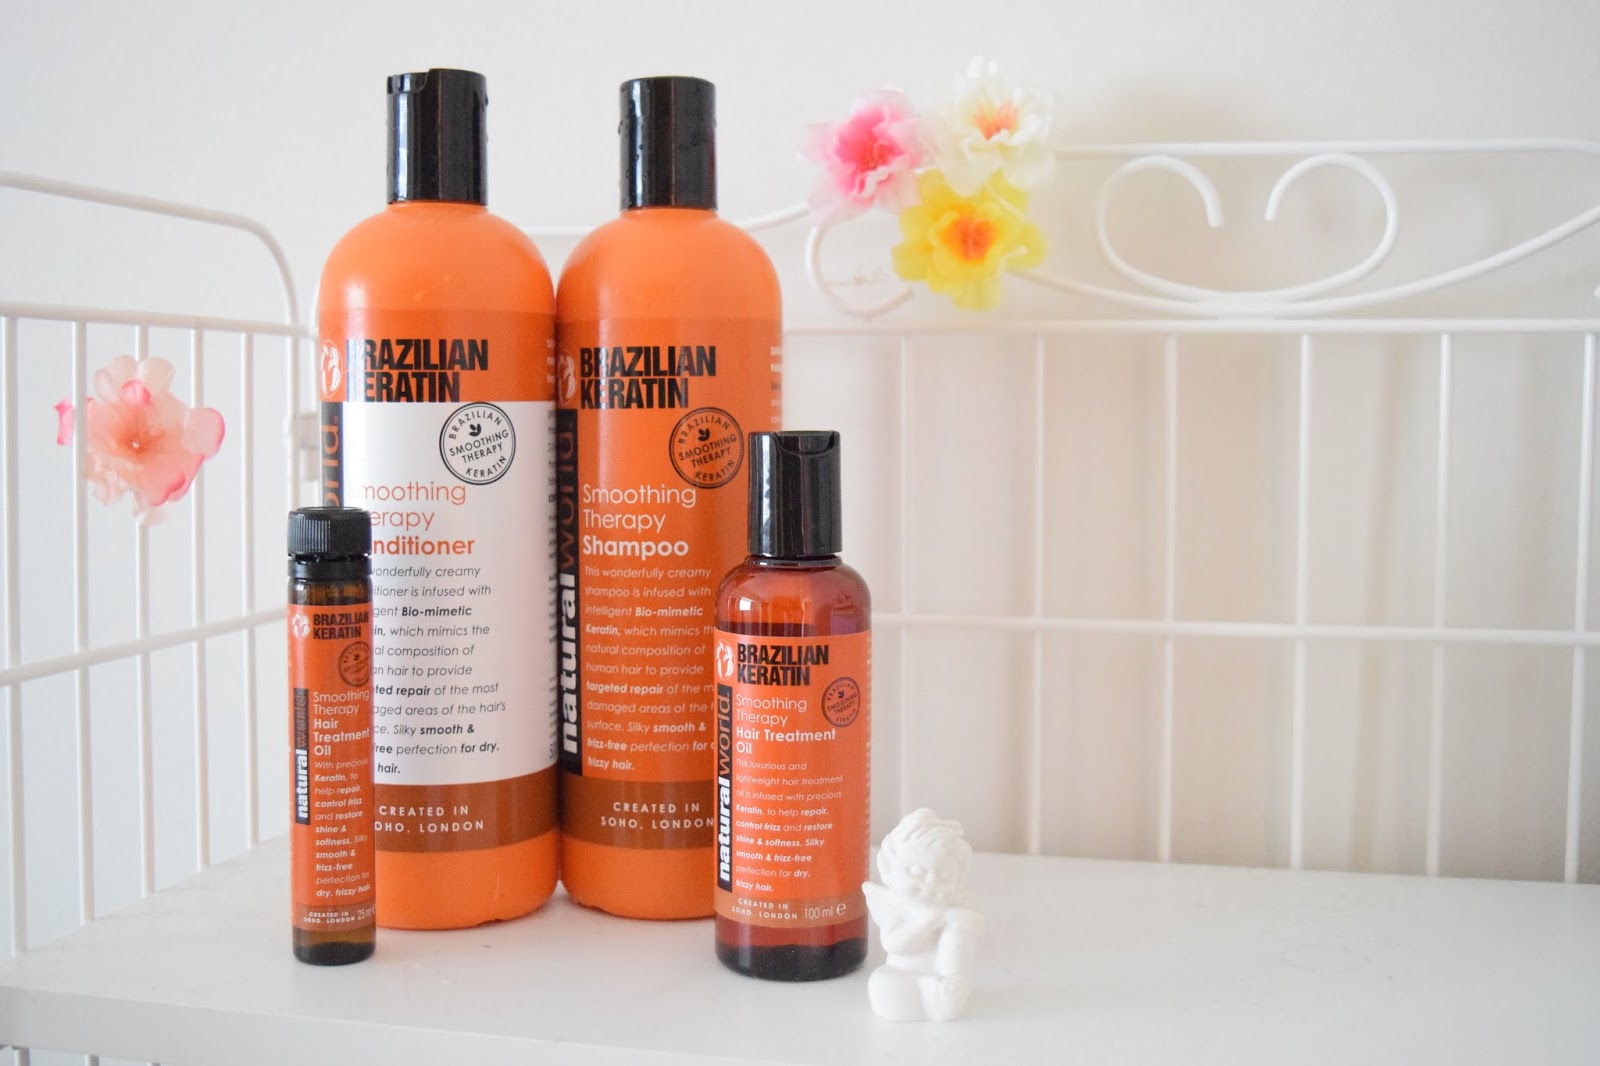 Review | World Brazilian Keratin Range | At Home With Cat